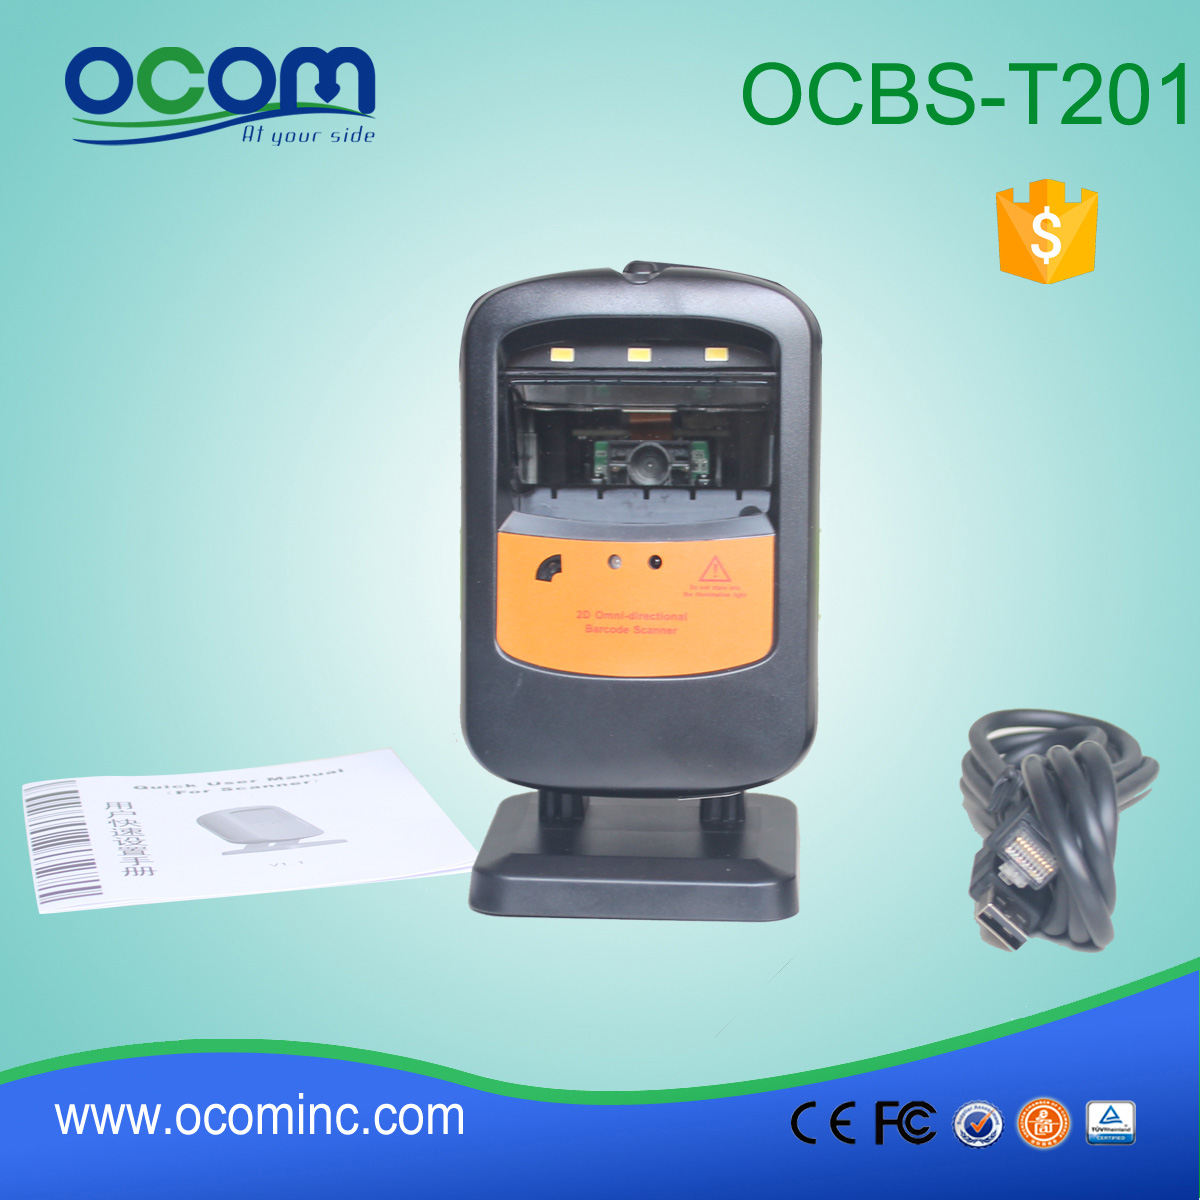 2015 plus récent QR immaging Barcode Scanner-OCBS-T201